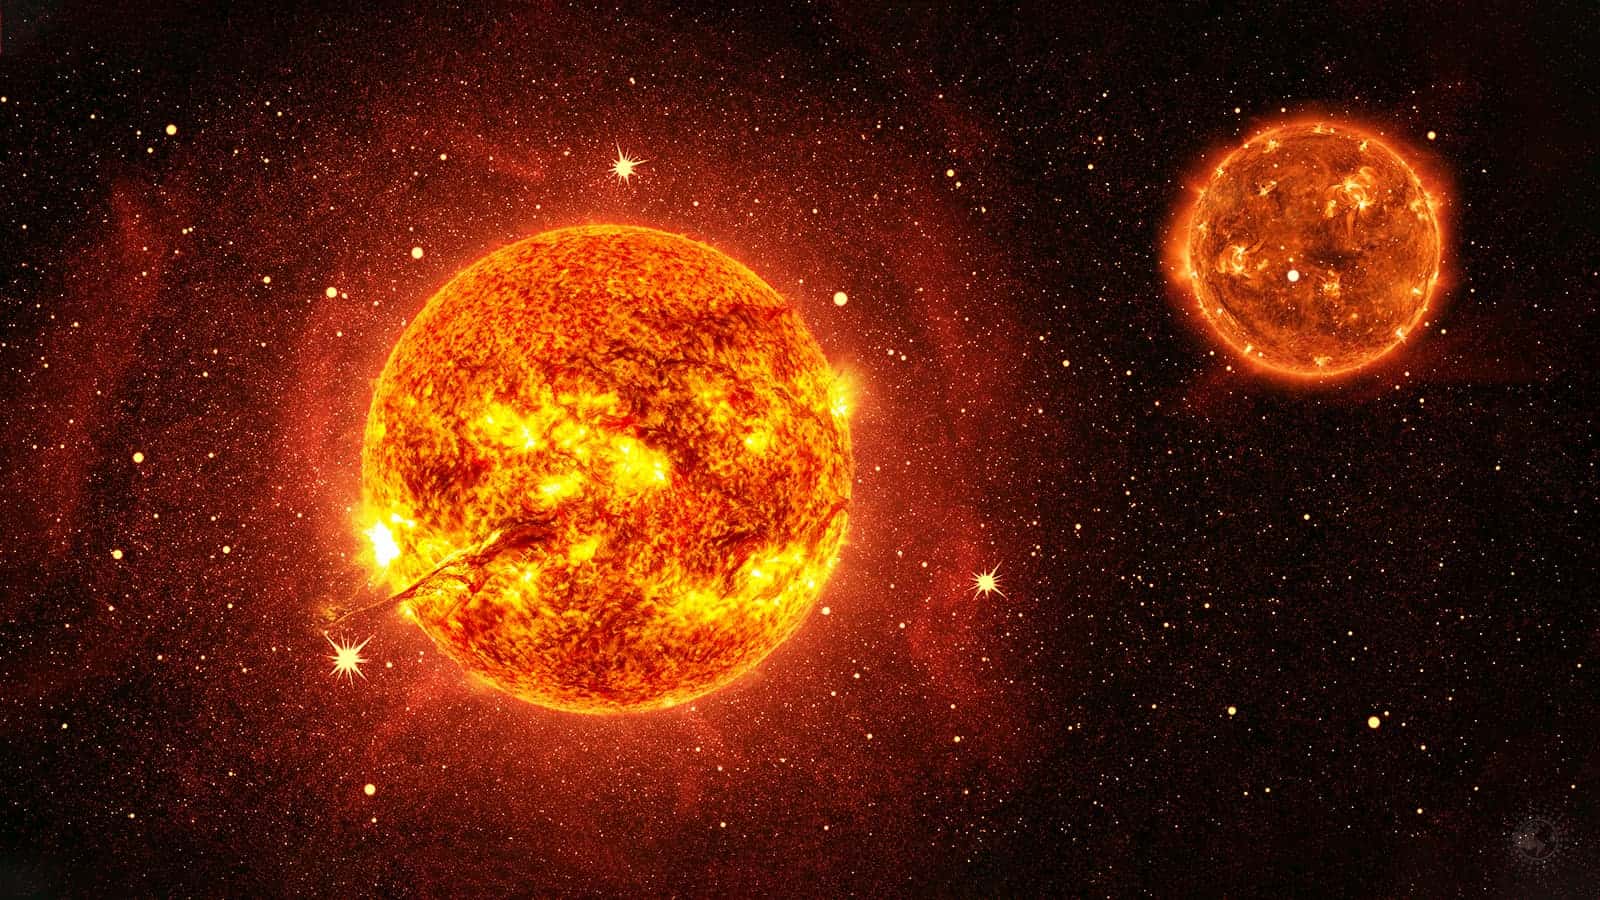 Harvard Physicists and Astronomers Reveal a “Second Sun” May Have Existed In Our Solar System